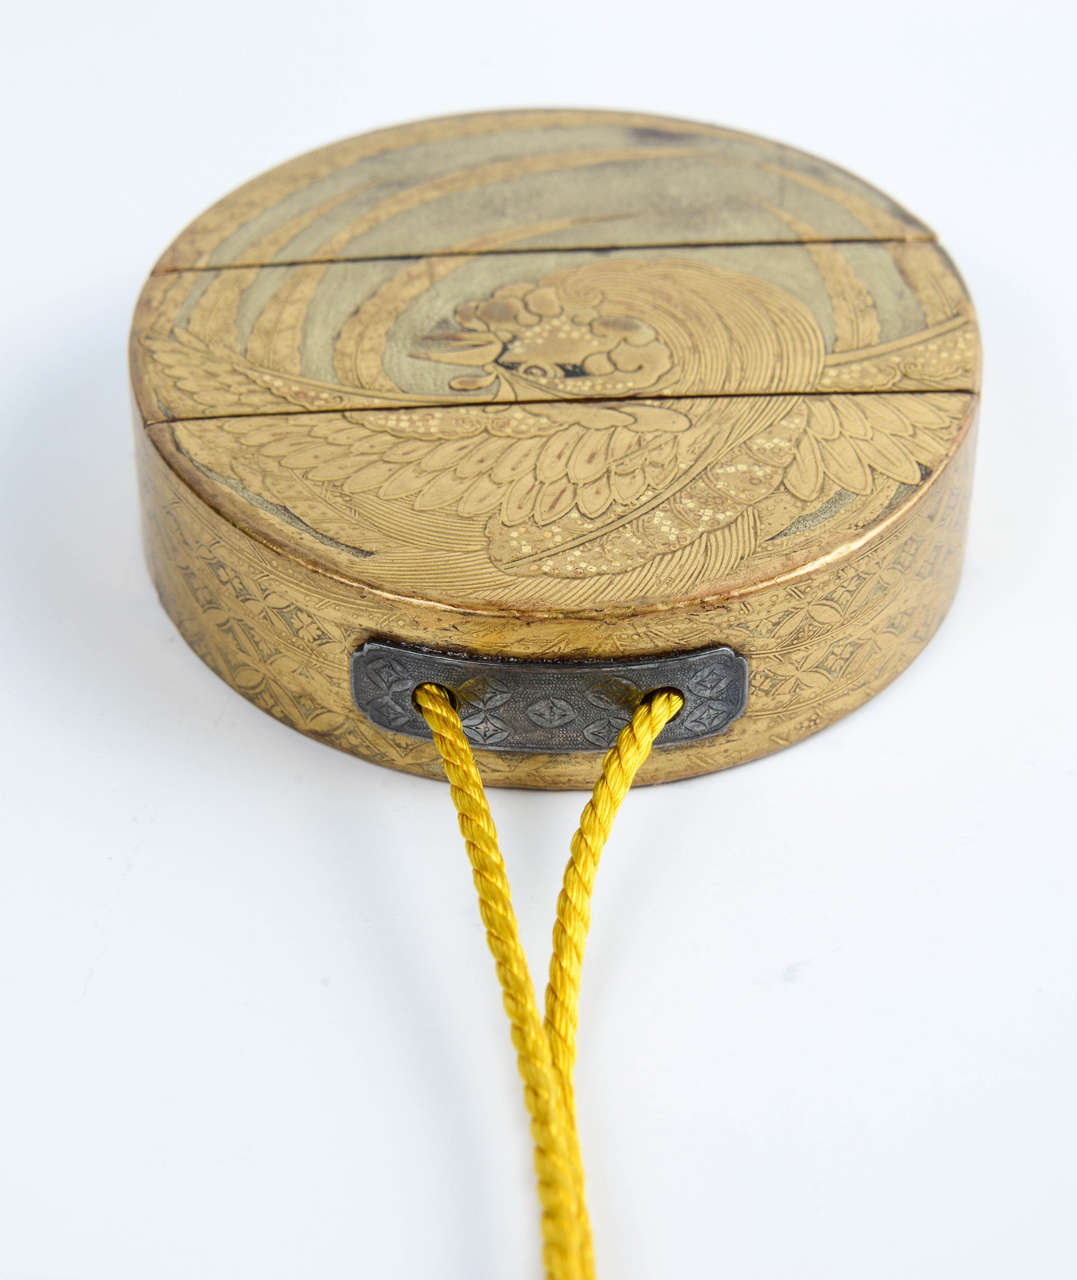 19th Century Japanese Gold Lacquer Inro with Netsuke (Decorative Pills Box) For Sale 3